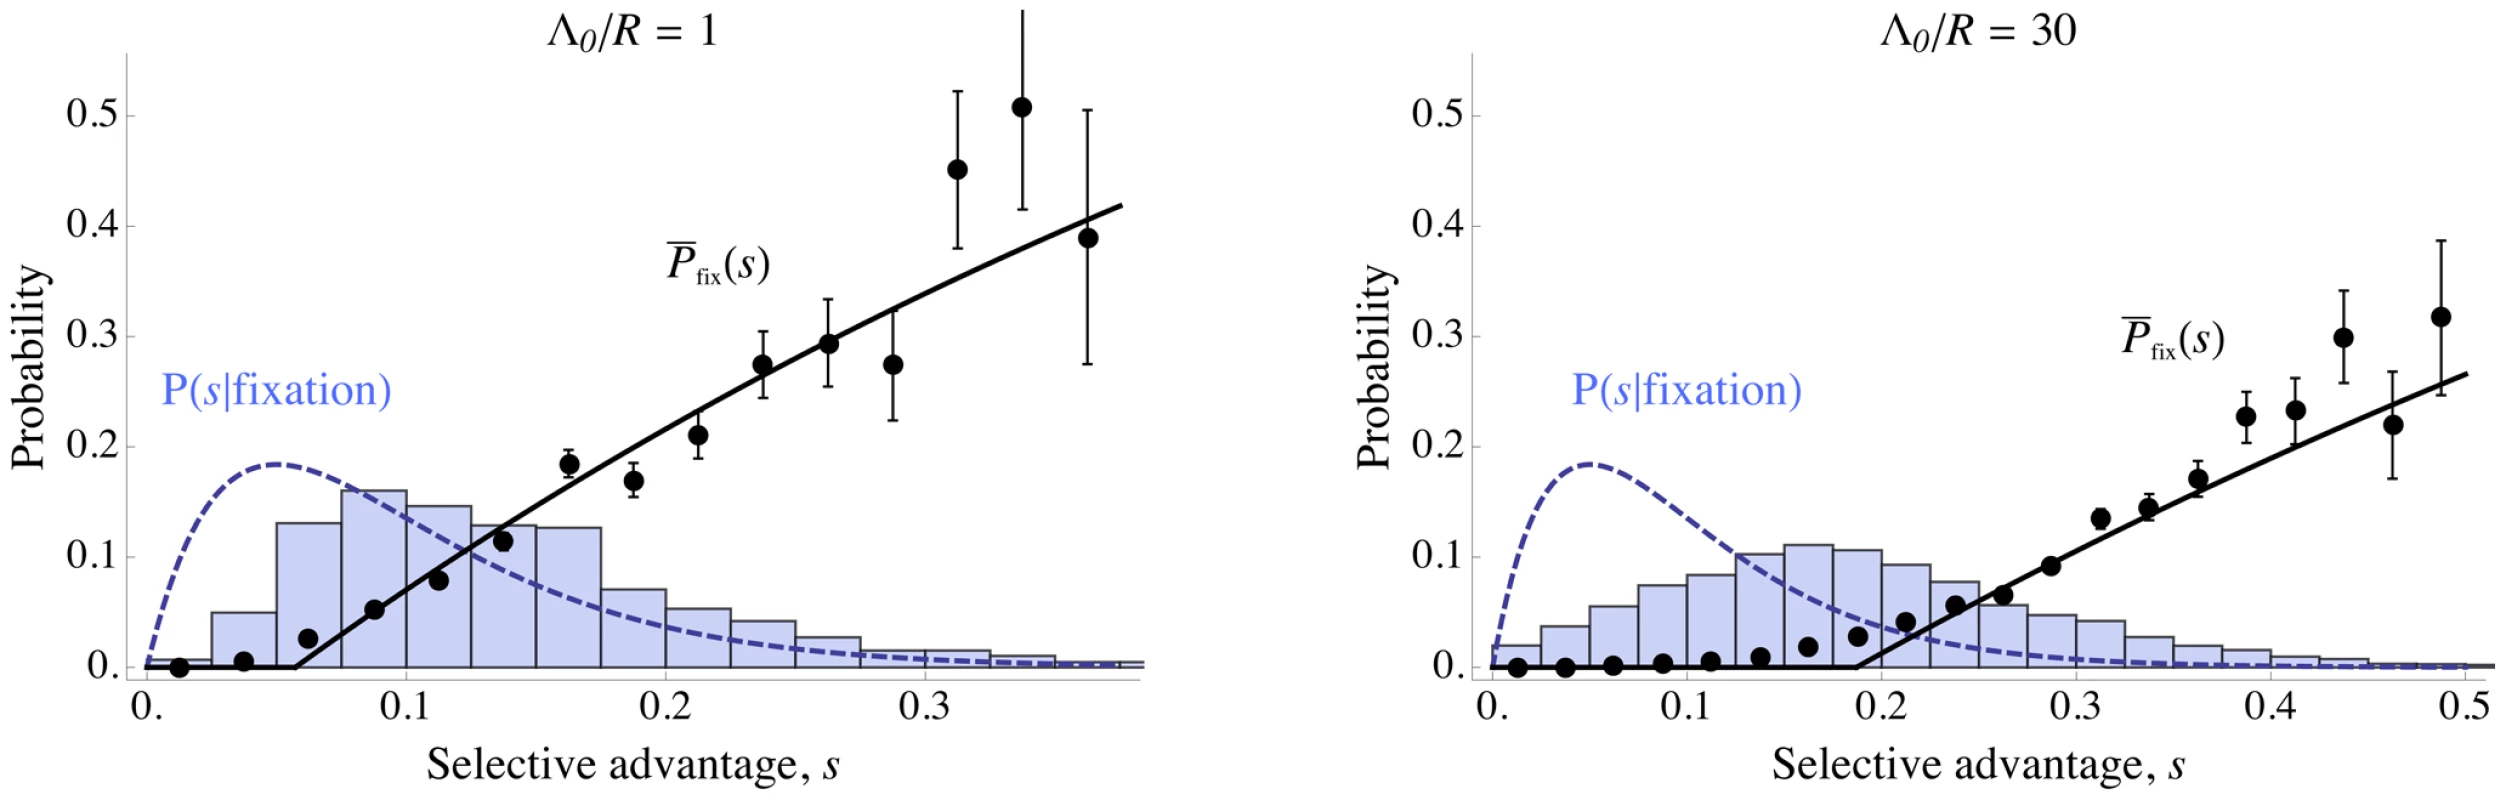 Effect of interference on distribution of successful mutations.